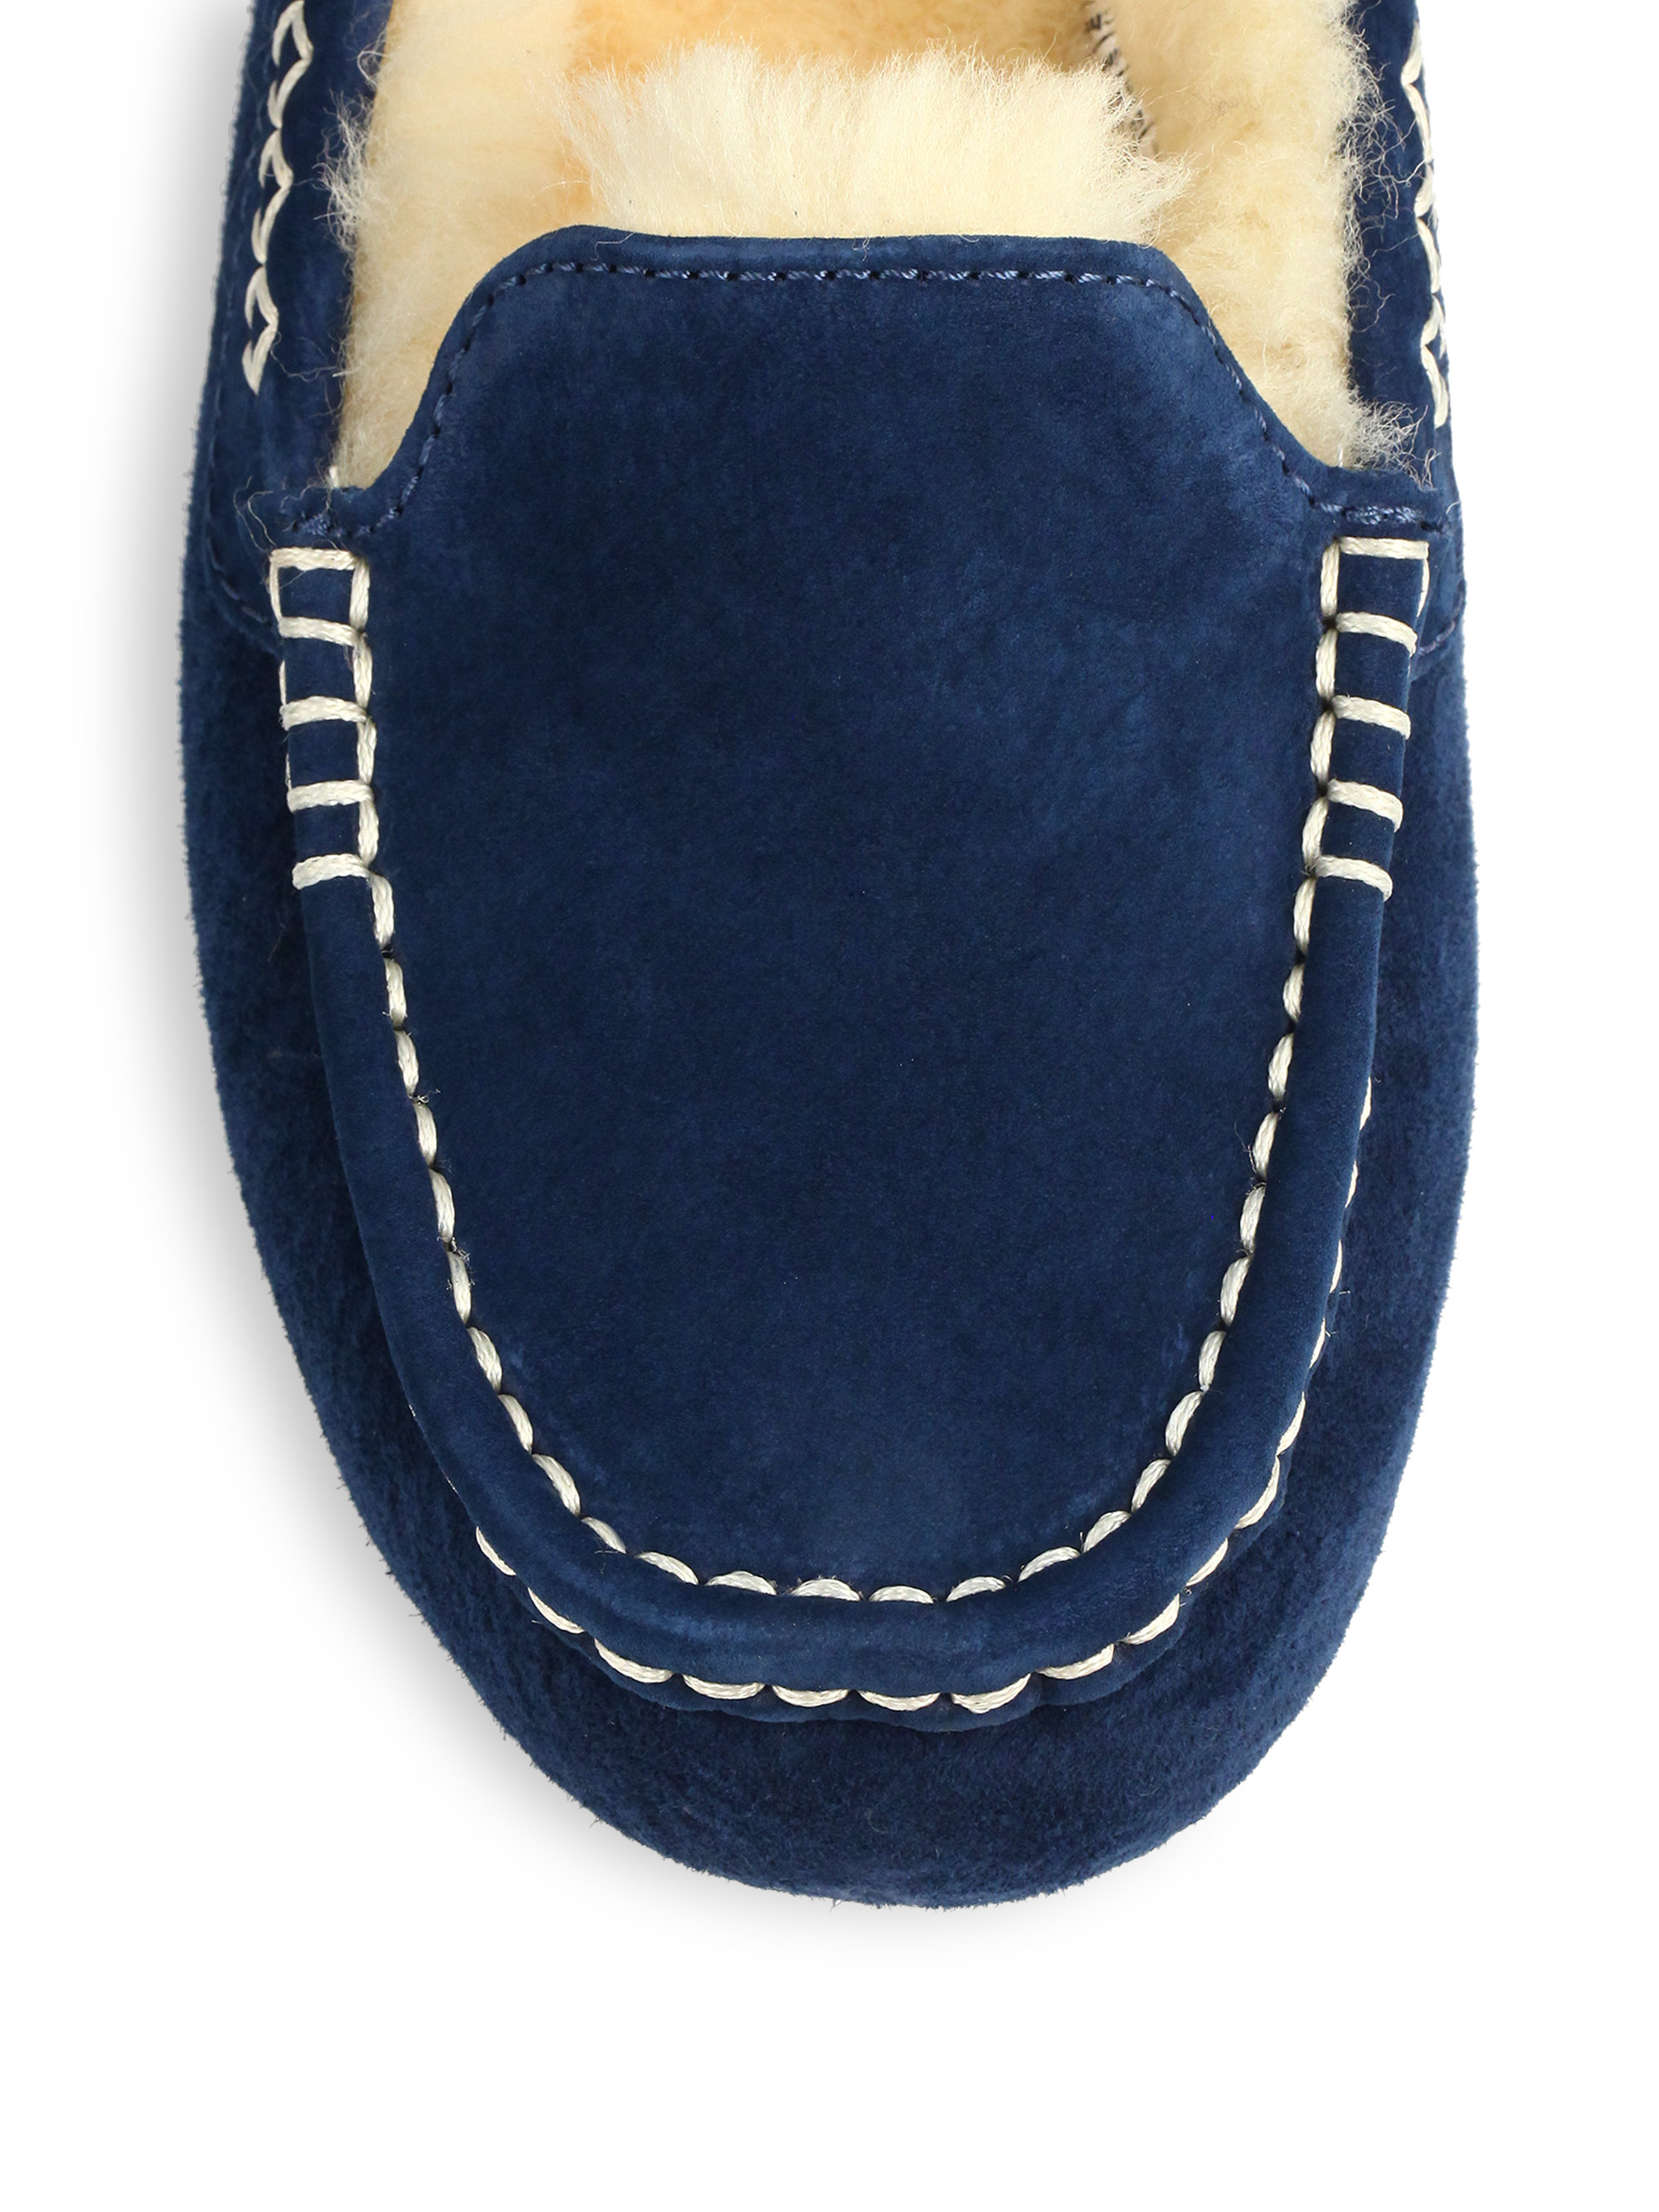 UGG Ansley Suede Shearlinglined Slippers in Navy (Blue) - Lyst